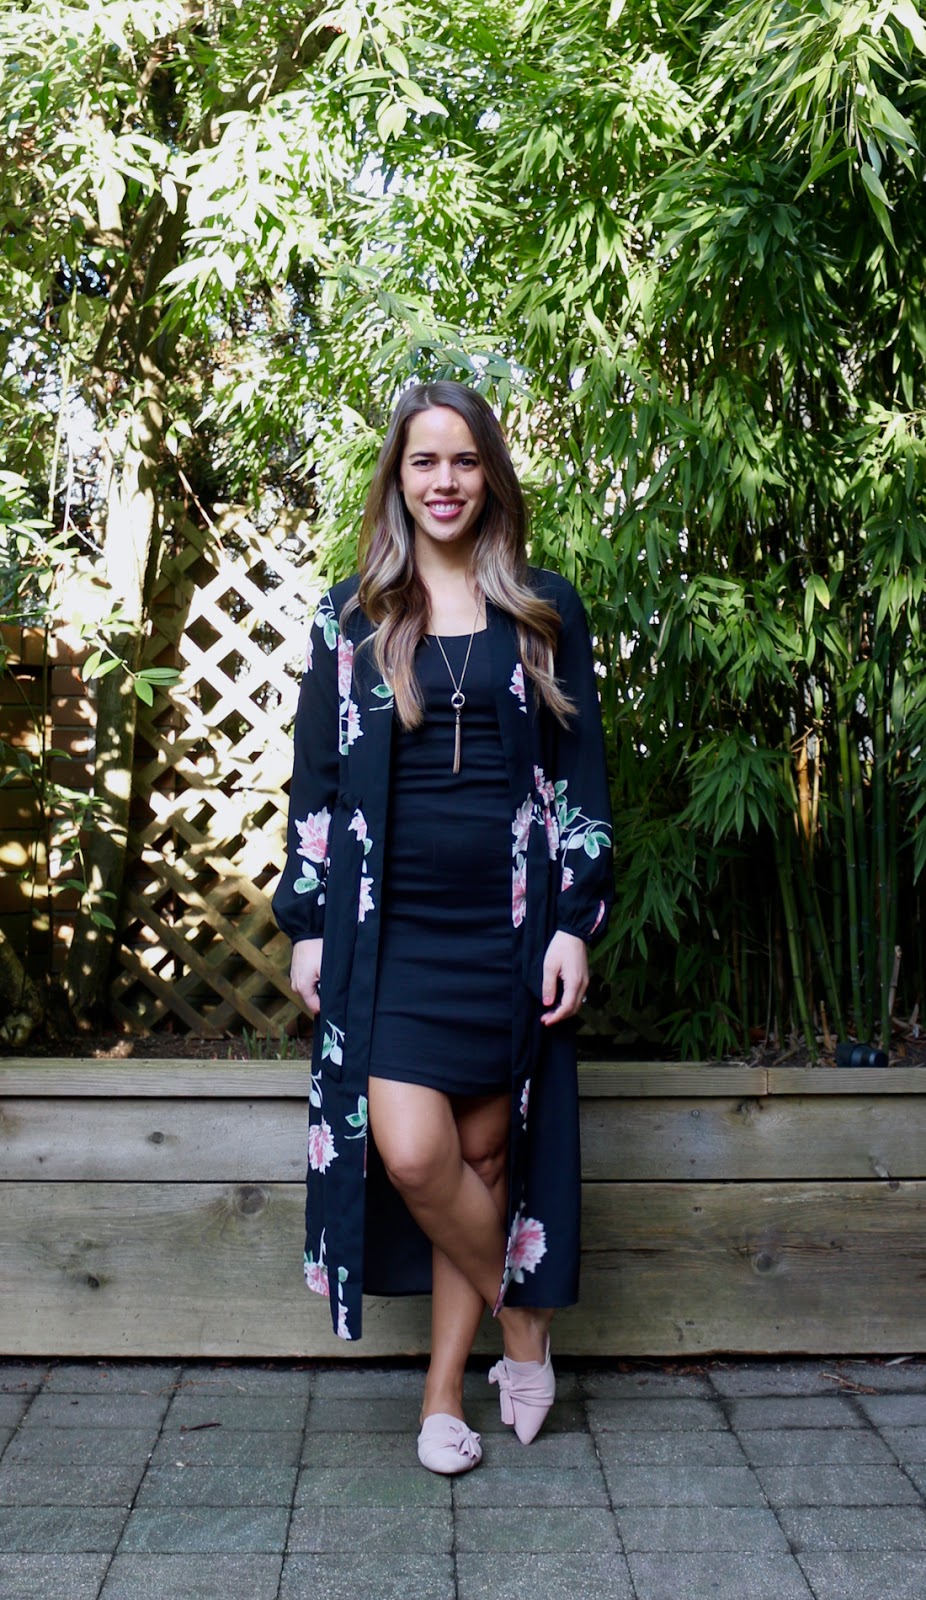 Jules in Flats - Black Jersey Dress with Duster Kimono (Business Casual Spring Workwear on a Budget)